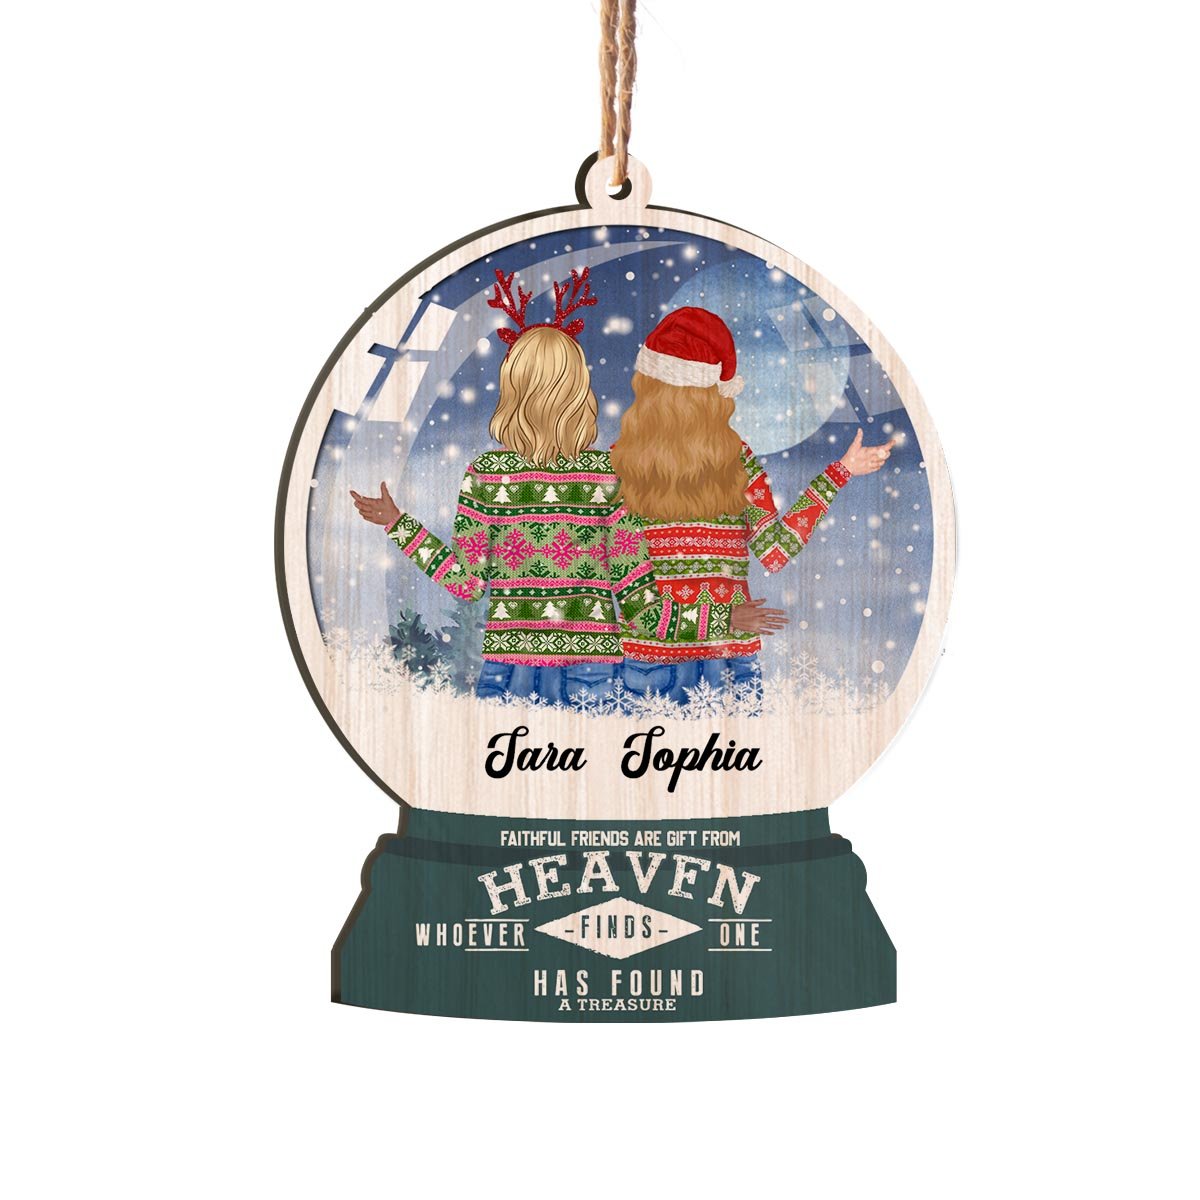 Faithful Friends Are Gifts From Heaven Christmas Personalizedwitch Personalized Printed Wood Ornament